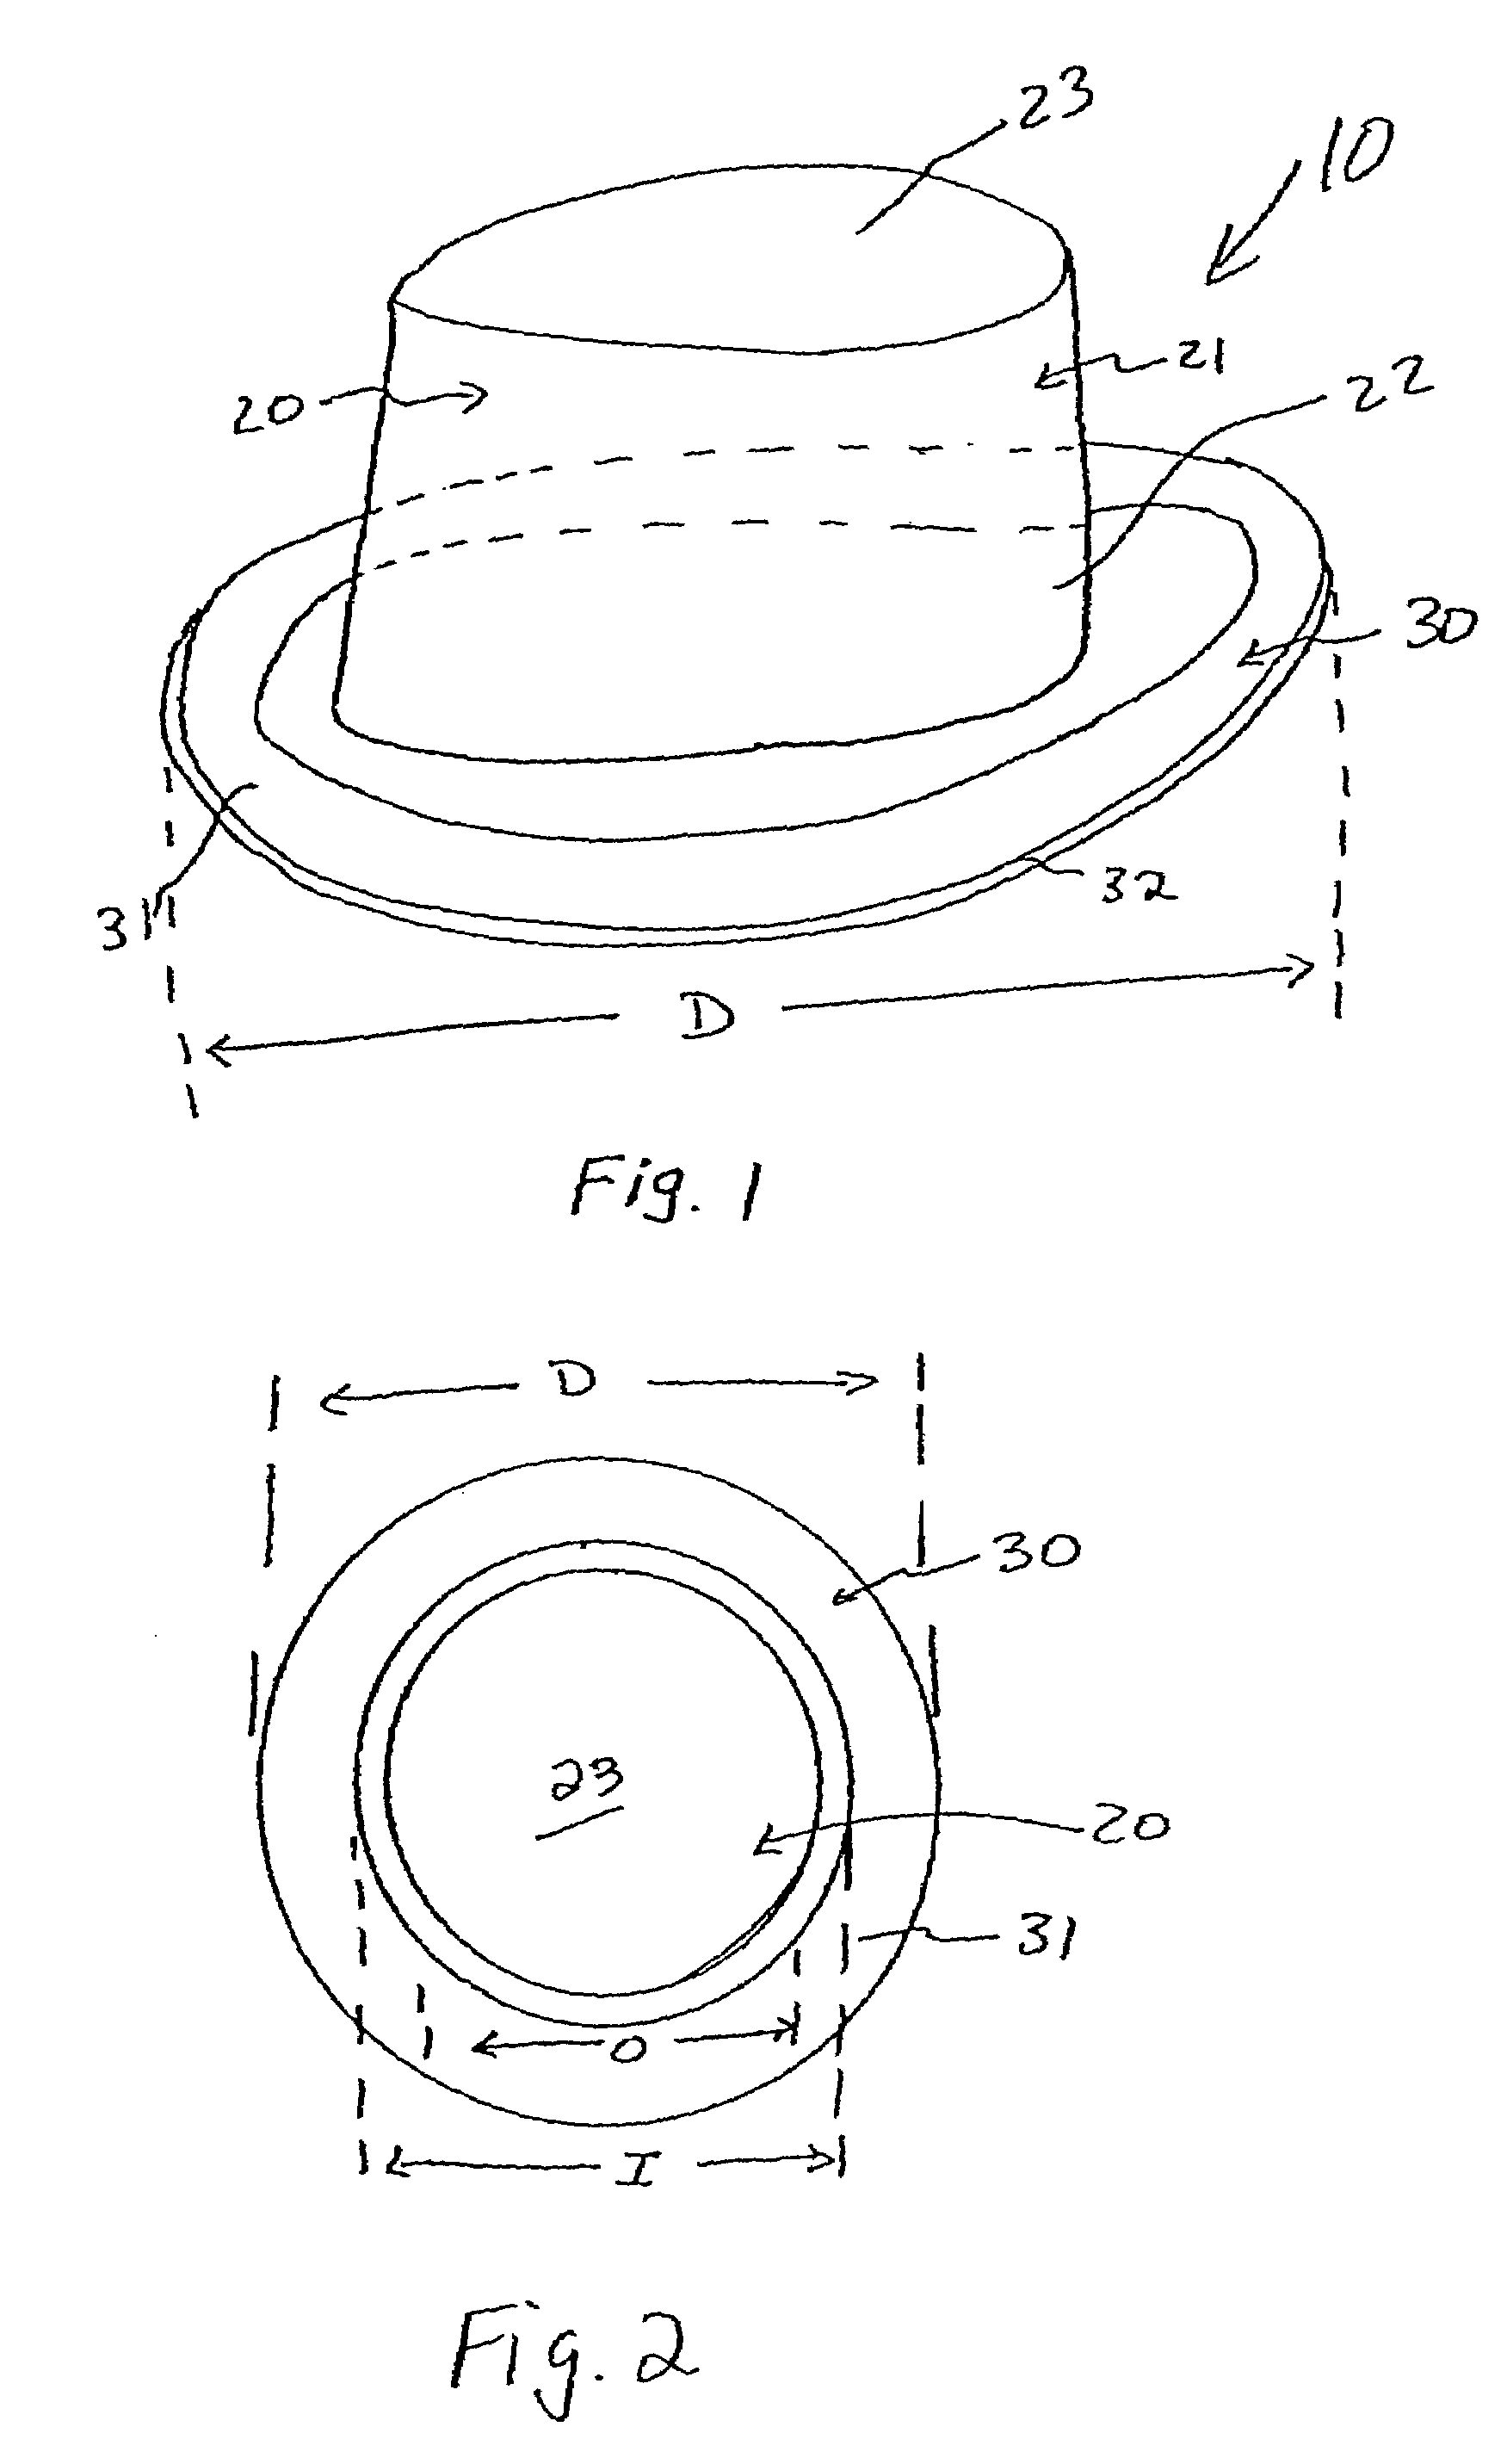 Cover and applicator for a portion of a mammalian body